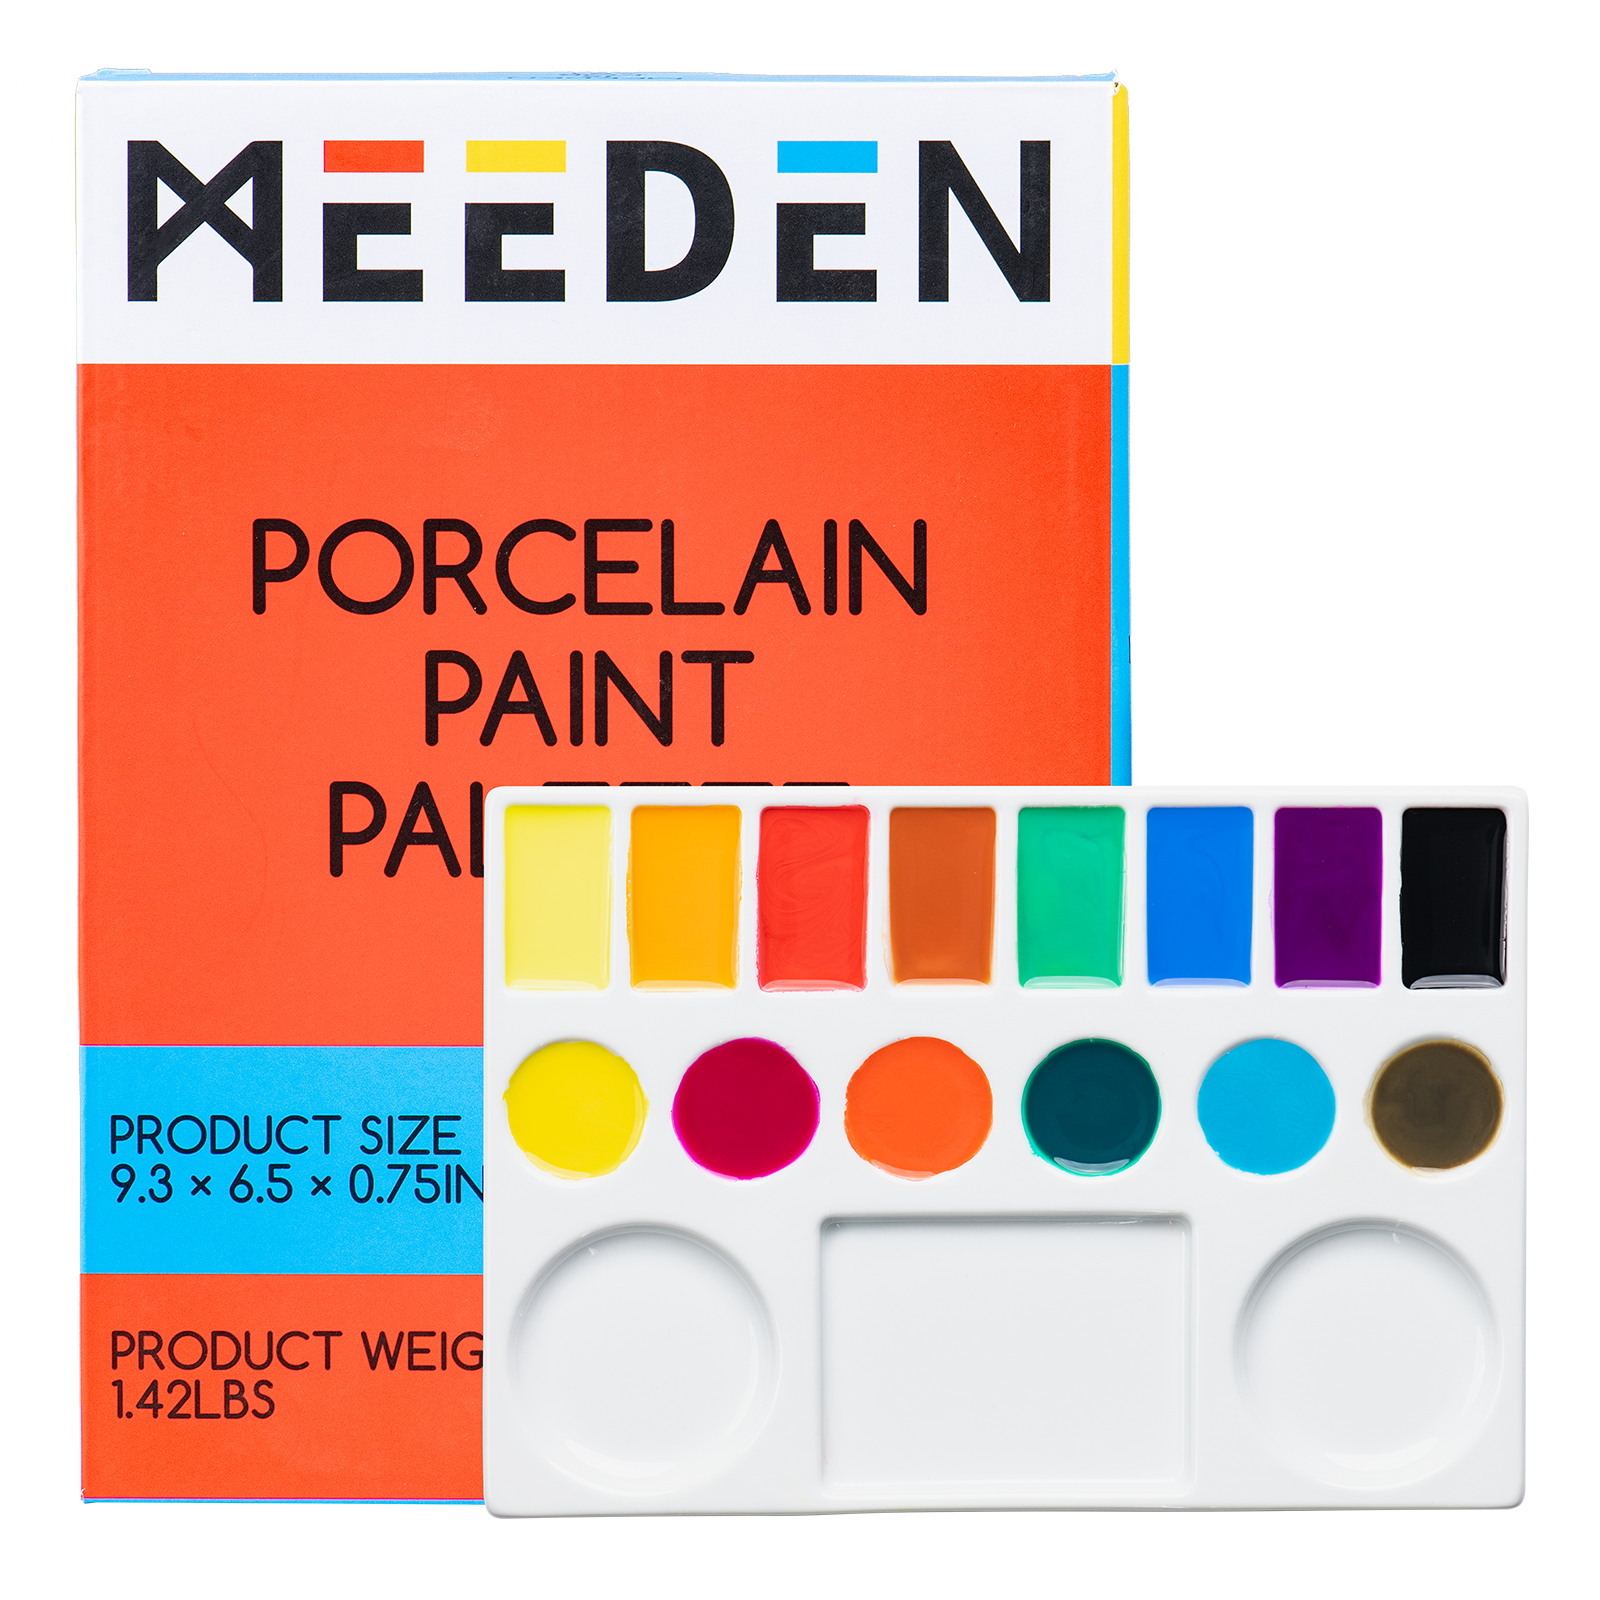 MEEDEN 17 Well Ceramic Artist Paint Palette, Porcelain Paint Mixing Palette  Tray for Watercolor Painting, Paint Pallet in Art Craft Supplies